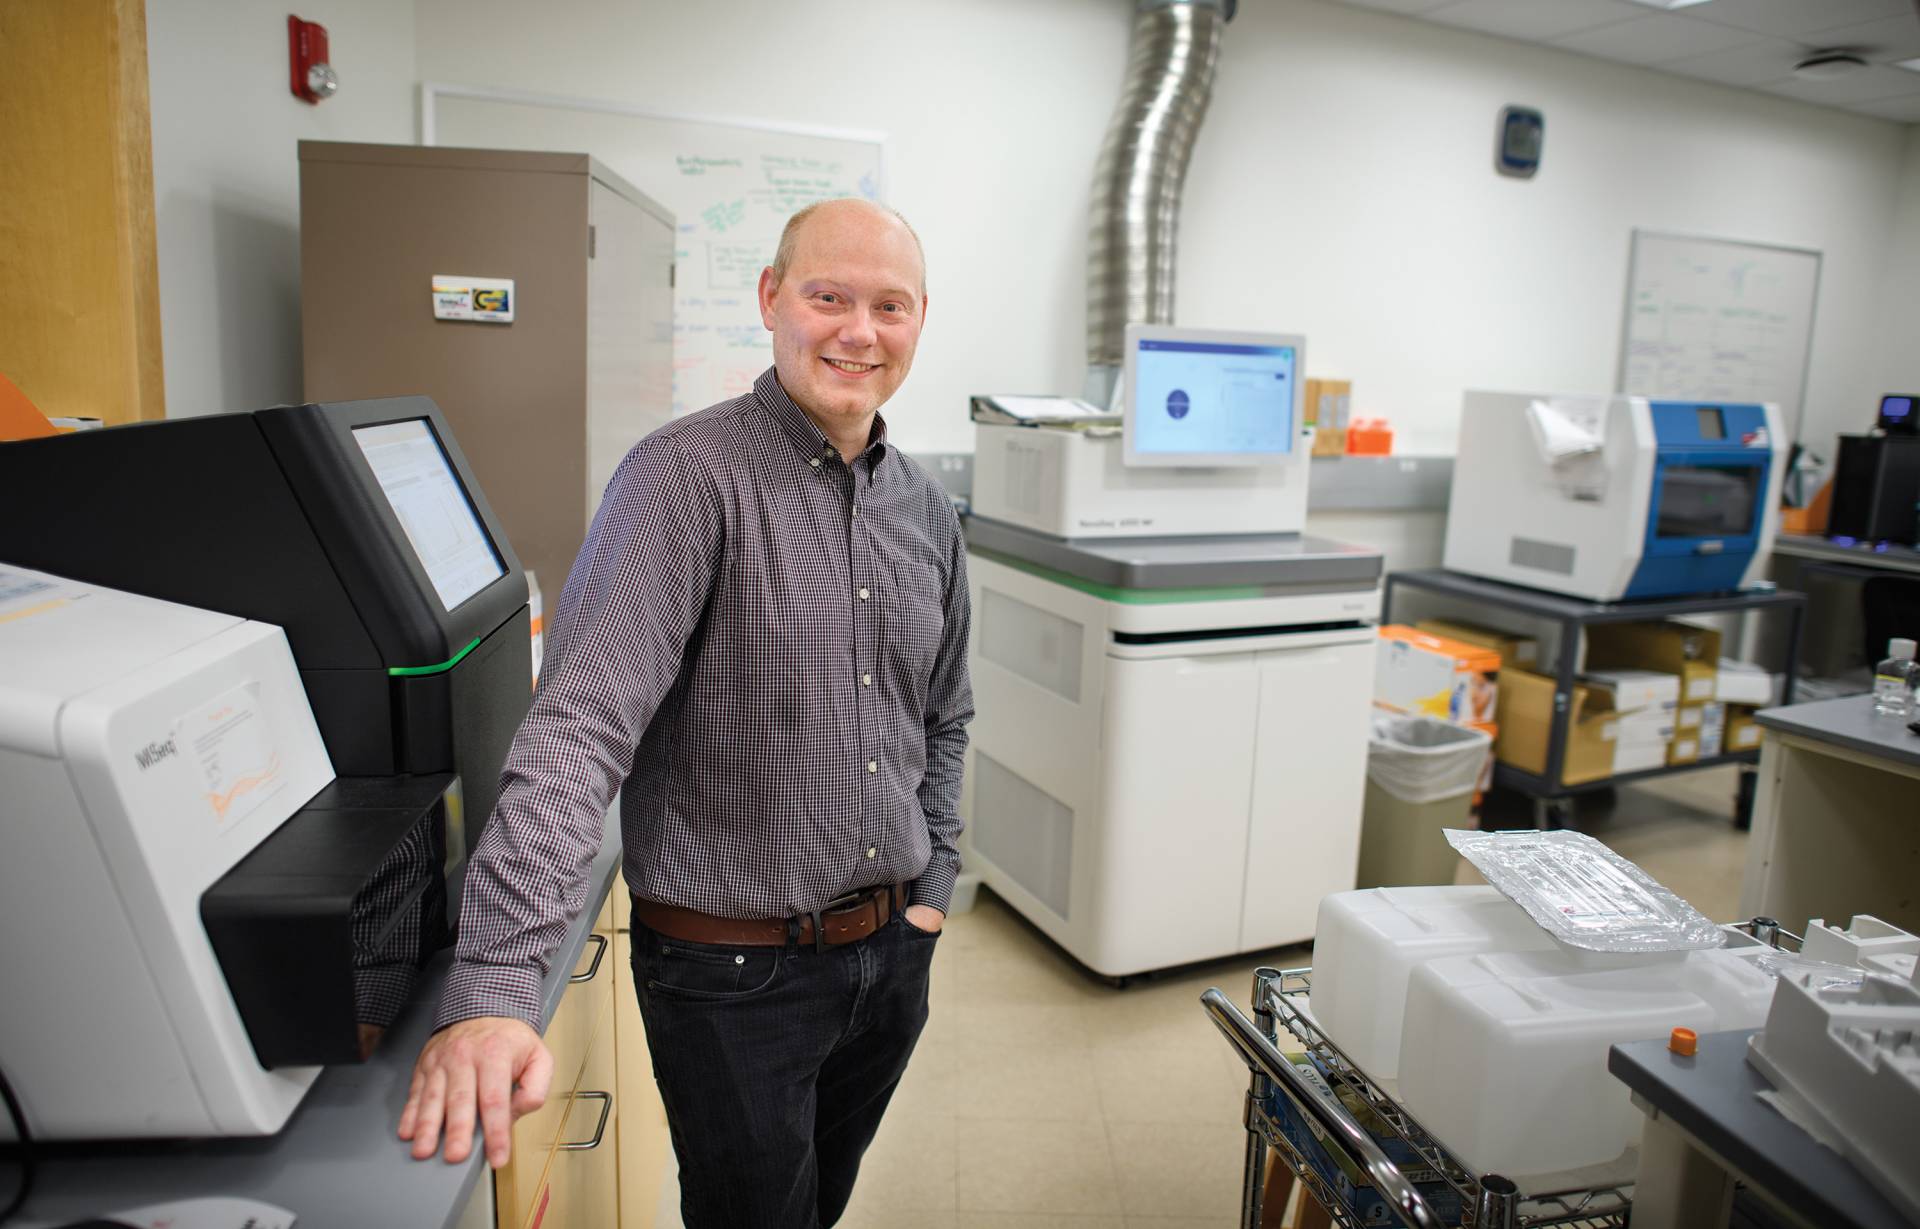 Joshua Akey surrounded by machines that help analyze DNA samples